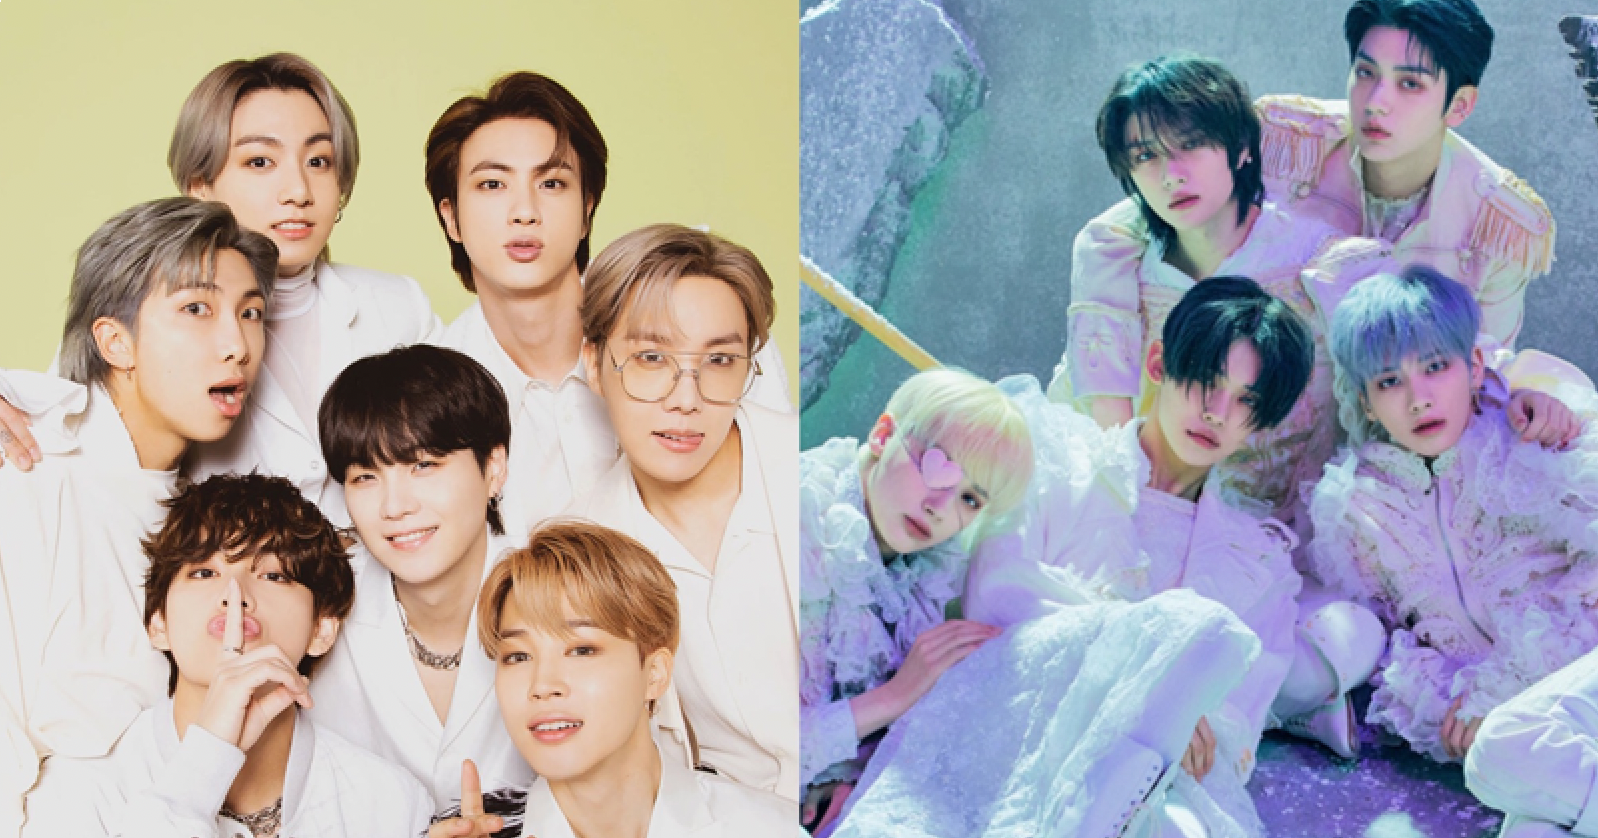 TXT and ENHYPEN to Perform Special Cover Collaboration at the 2021 KBS Gayo Daechukje